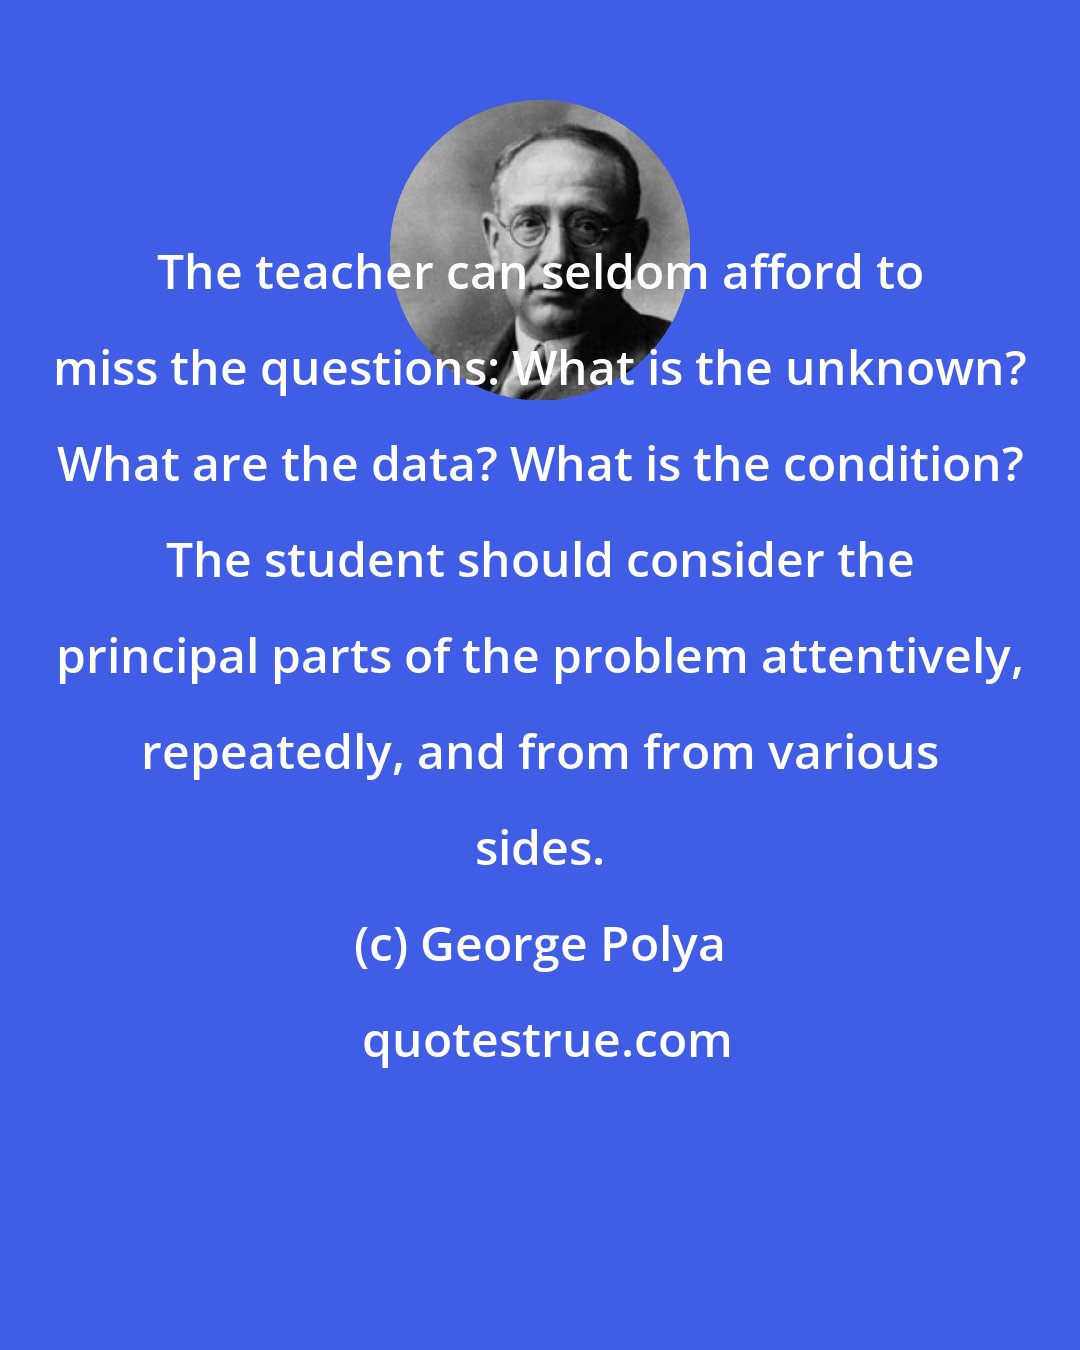 George Polya: The teacher can seldom afford to miss the questions: What is the unknown? What are the data? What is the condition? The student should consider the principal parts of the problem attentively, repeatedly, and from from various sides.